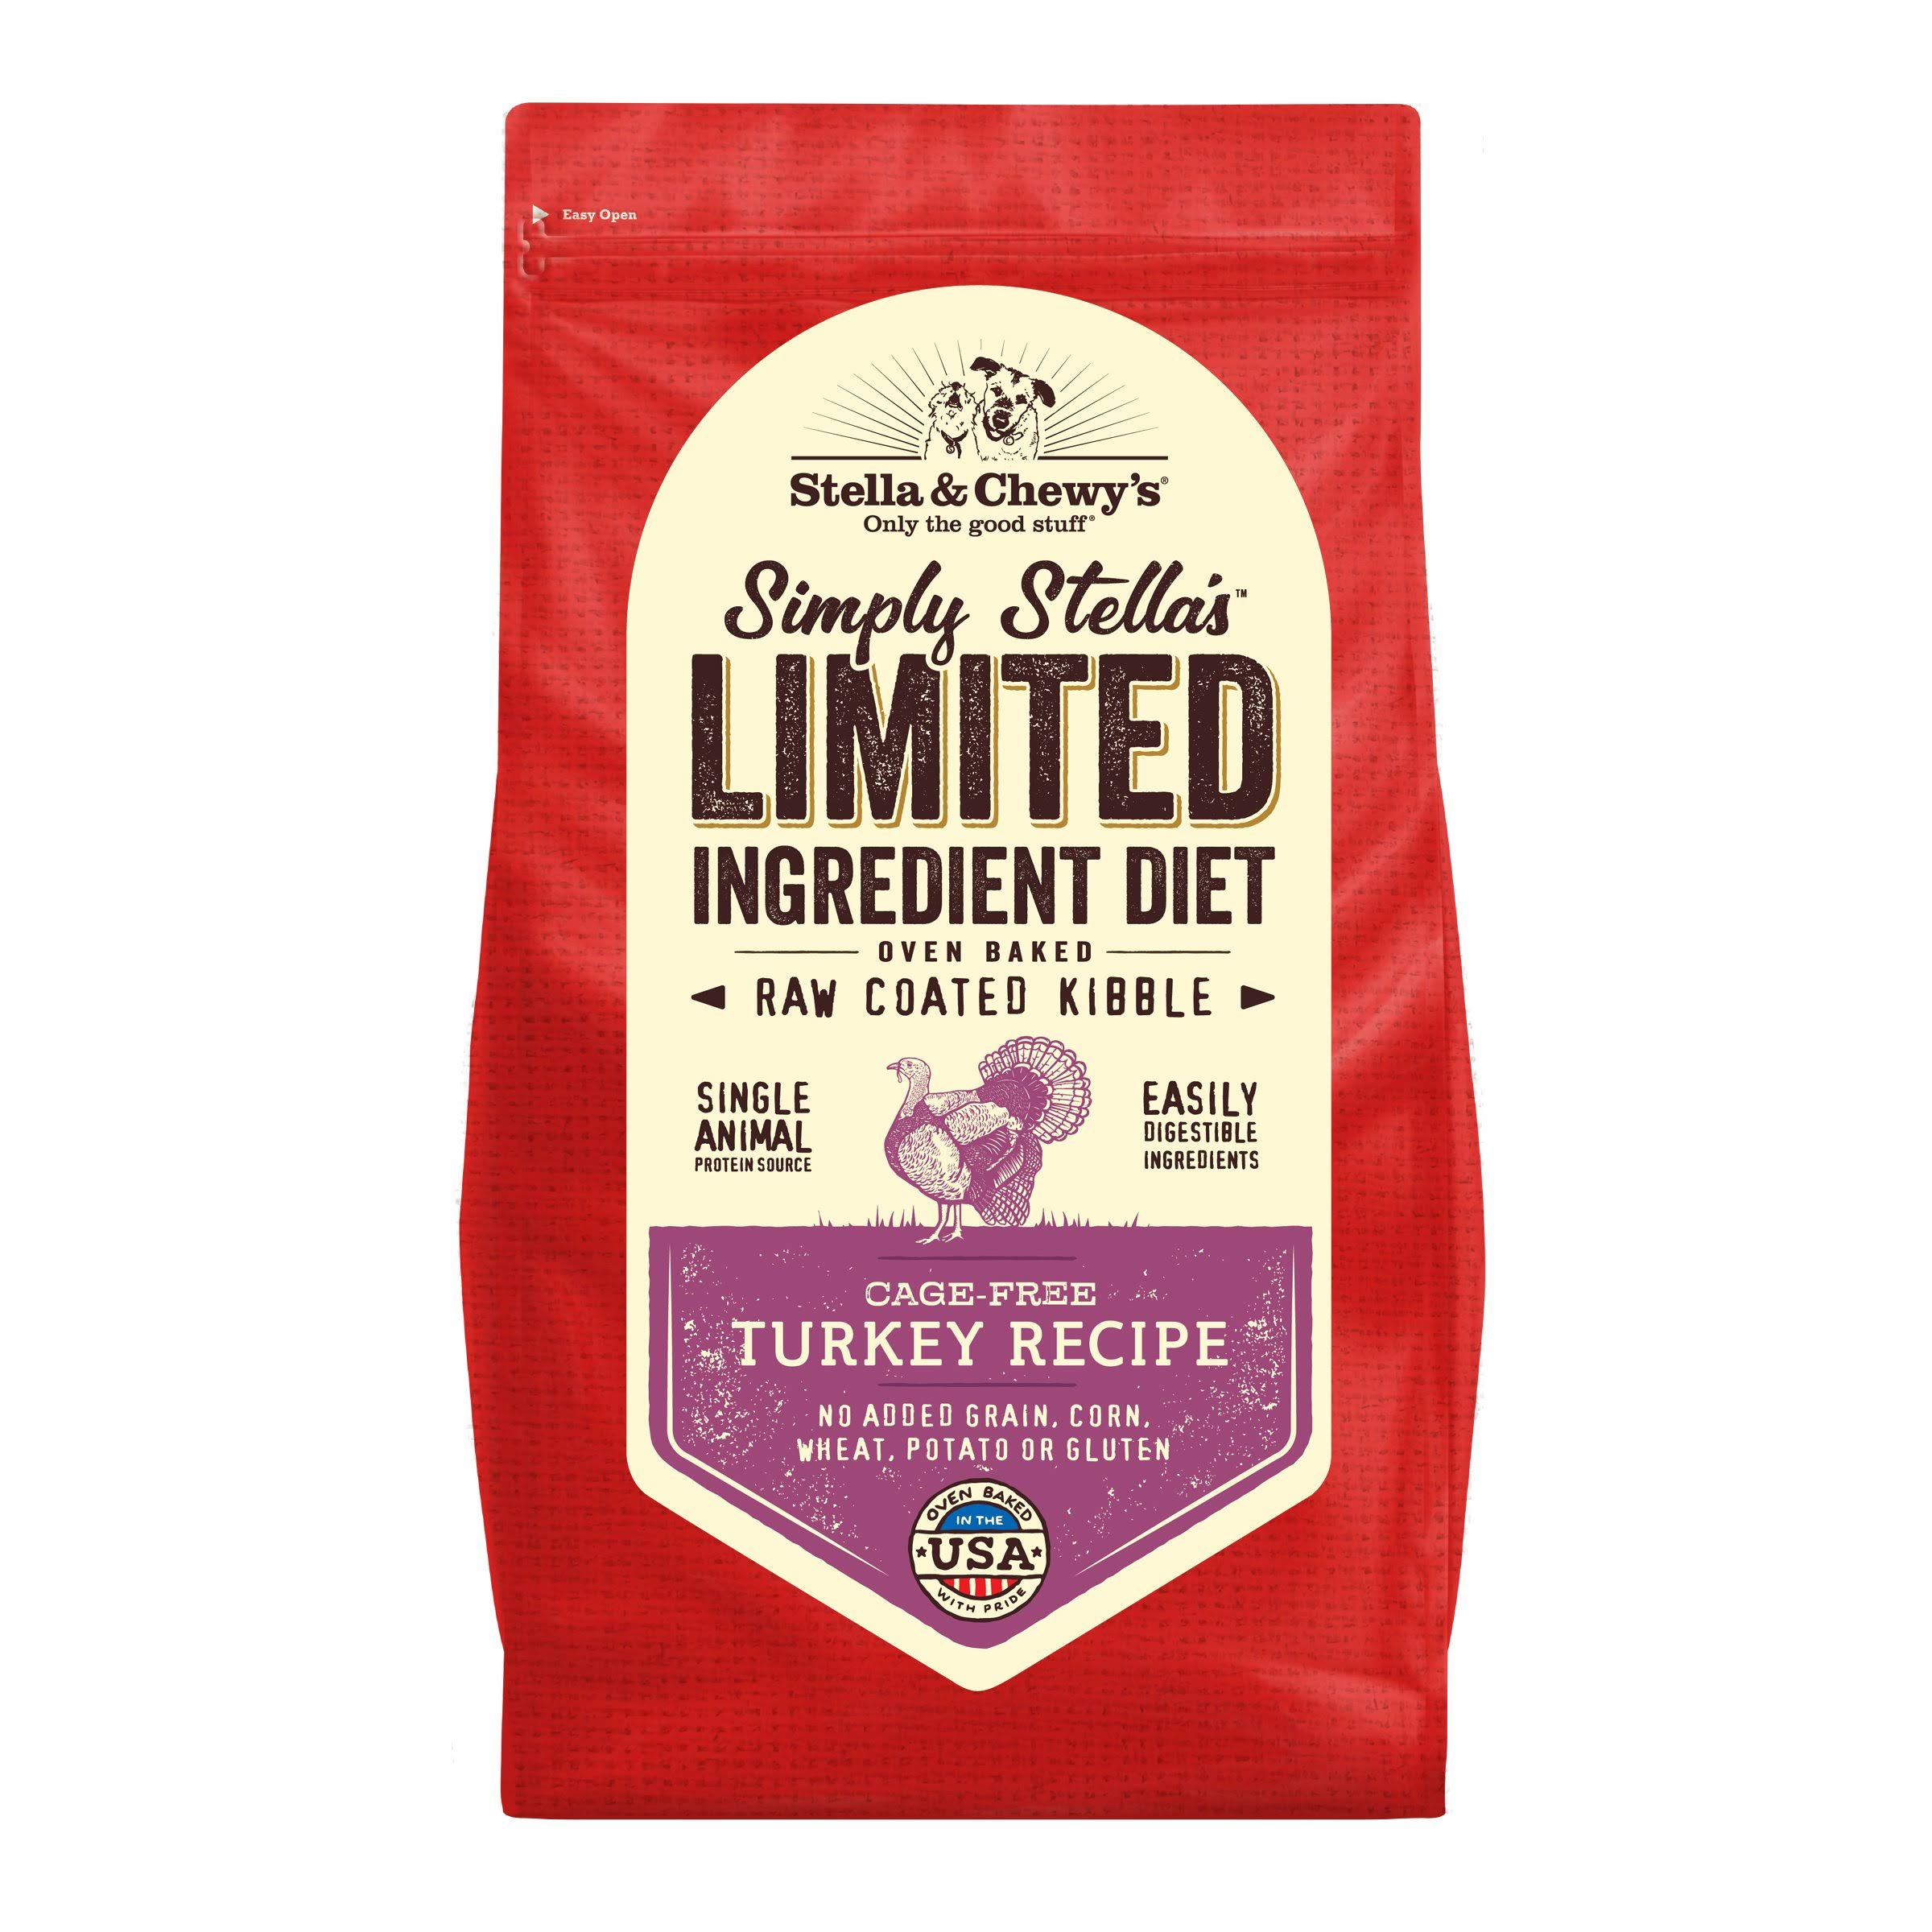 Stella & Chewy's Simply Stella Limited Ingredient Diet Cage-Free Turkey Recipe - 3.5lb